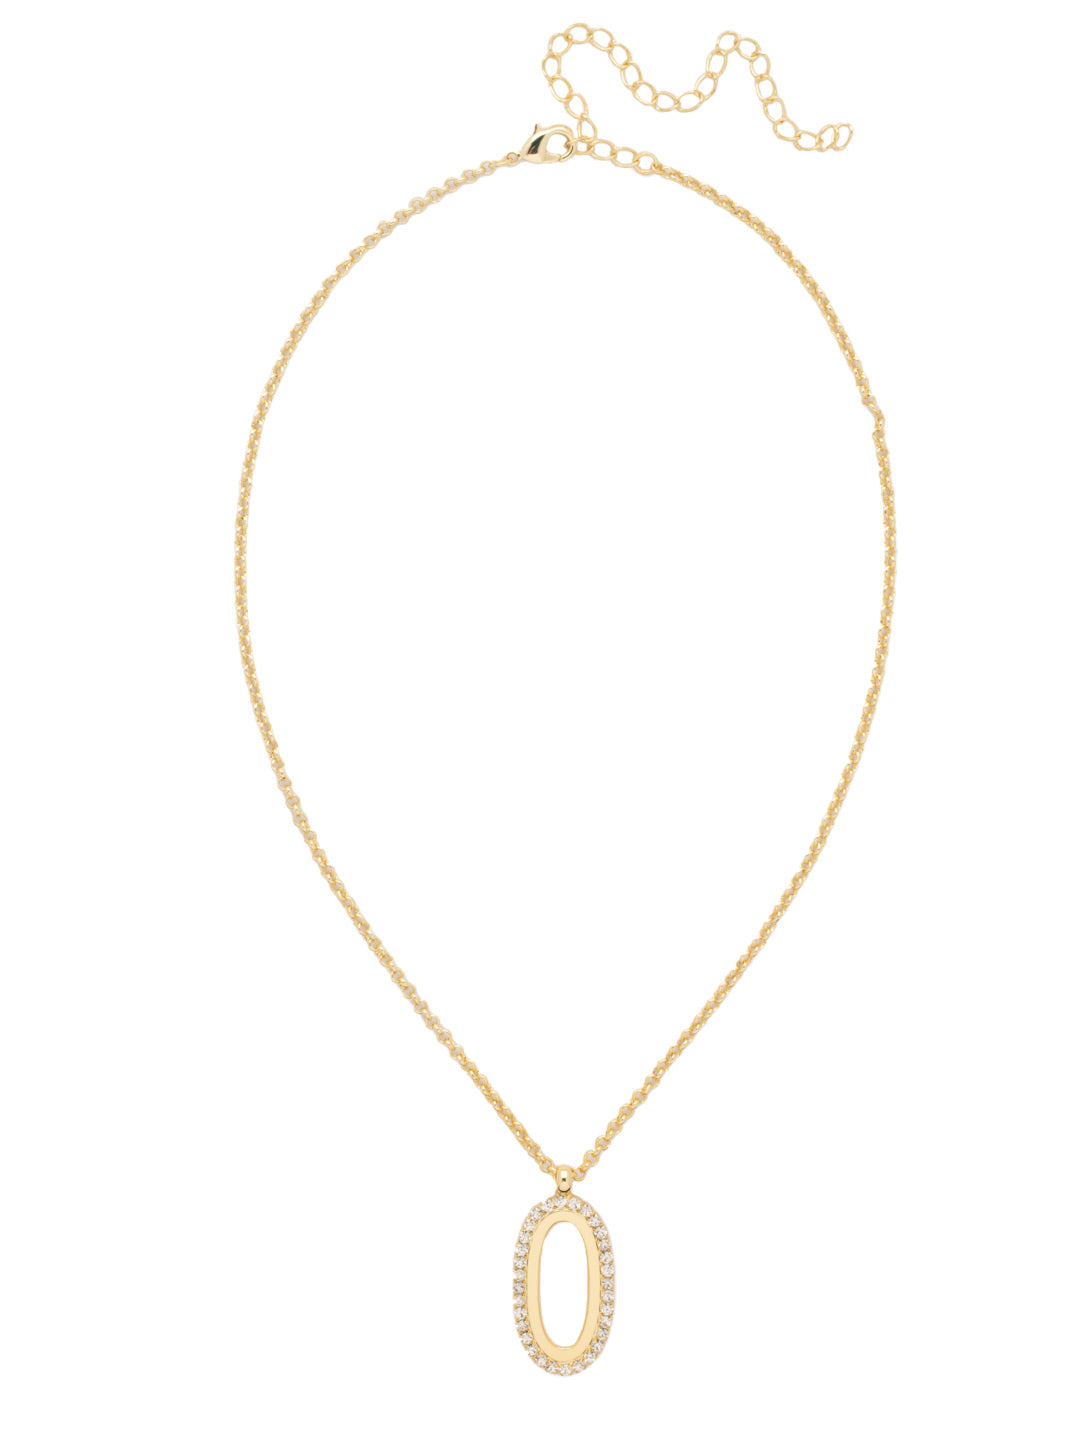 Tori Pendant Necklace - NFL3BGCRY - <p>The Tori Pendant Necklace features a single rhinestone embellished chain link on an adjustable chain, secured with a lobster claw clasp. From Sorrelli's Crystal collection in our Bright Gold-tone finish.</p>